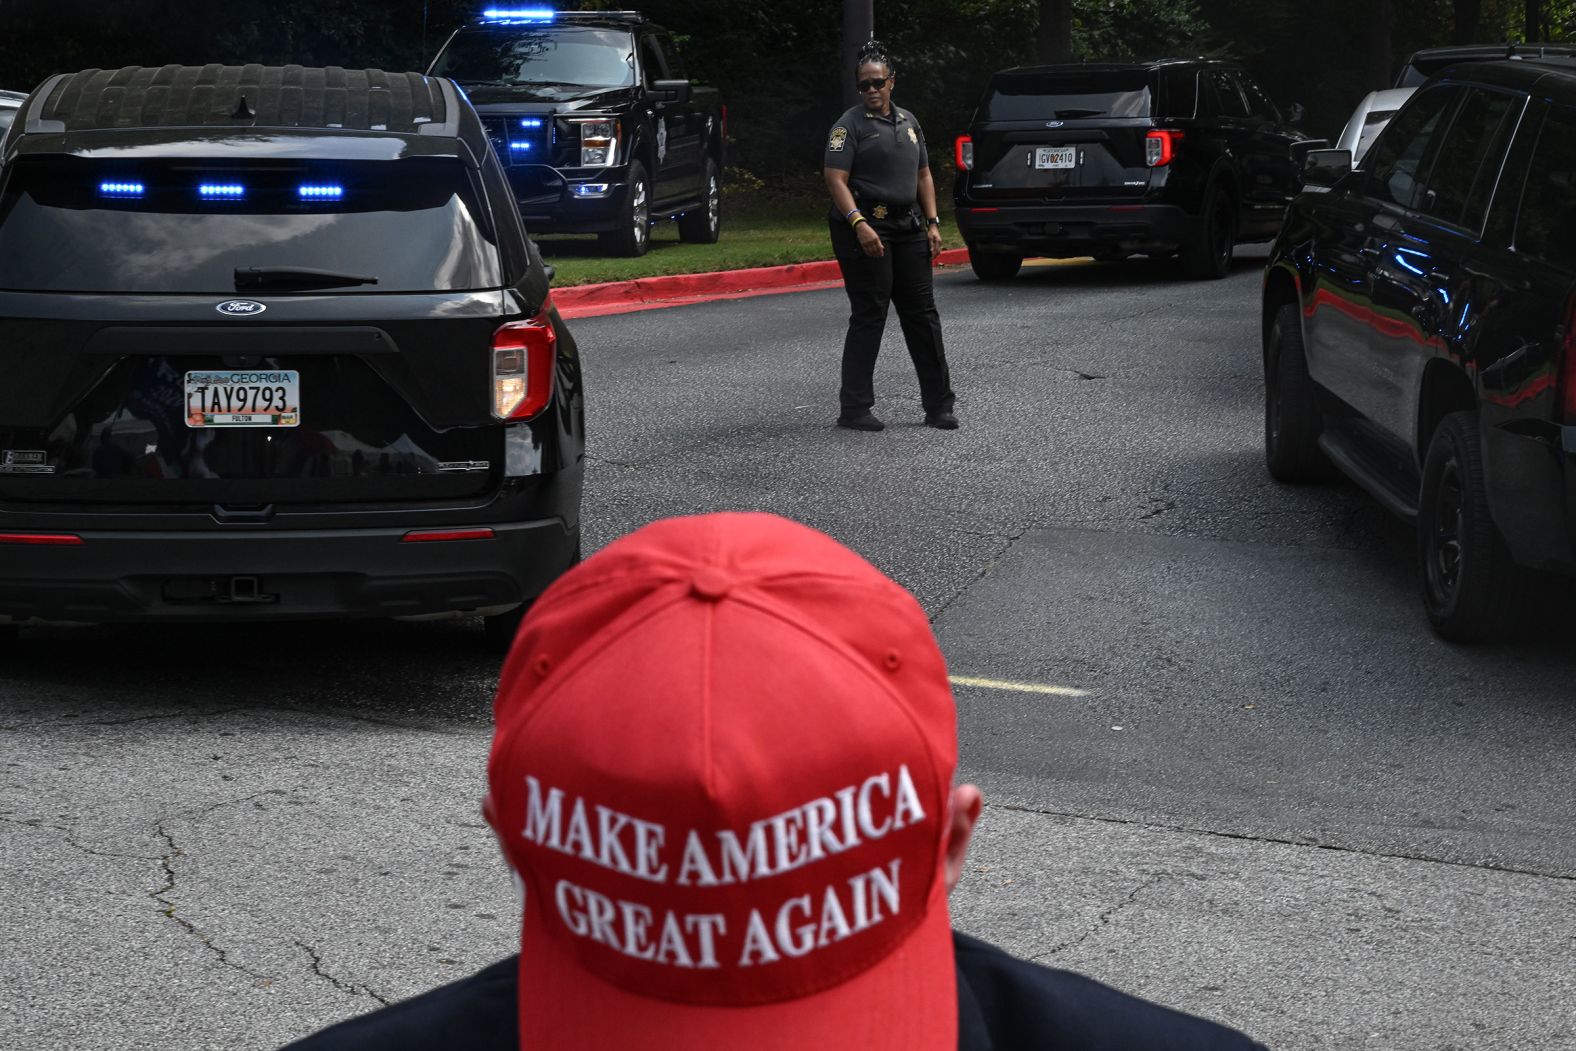 Authorities maneuver vehicles as Trump supporters line a street near the jail on Thursday.